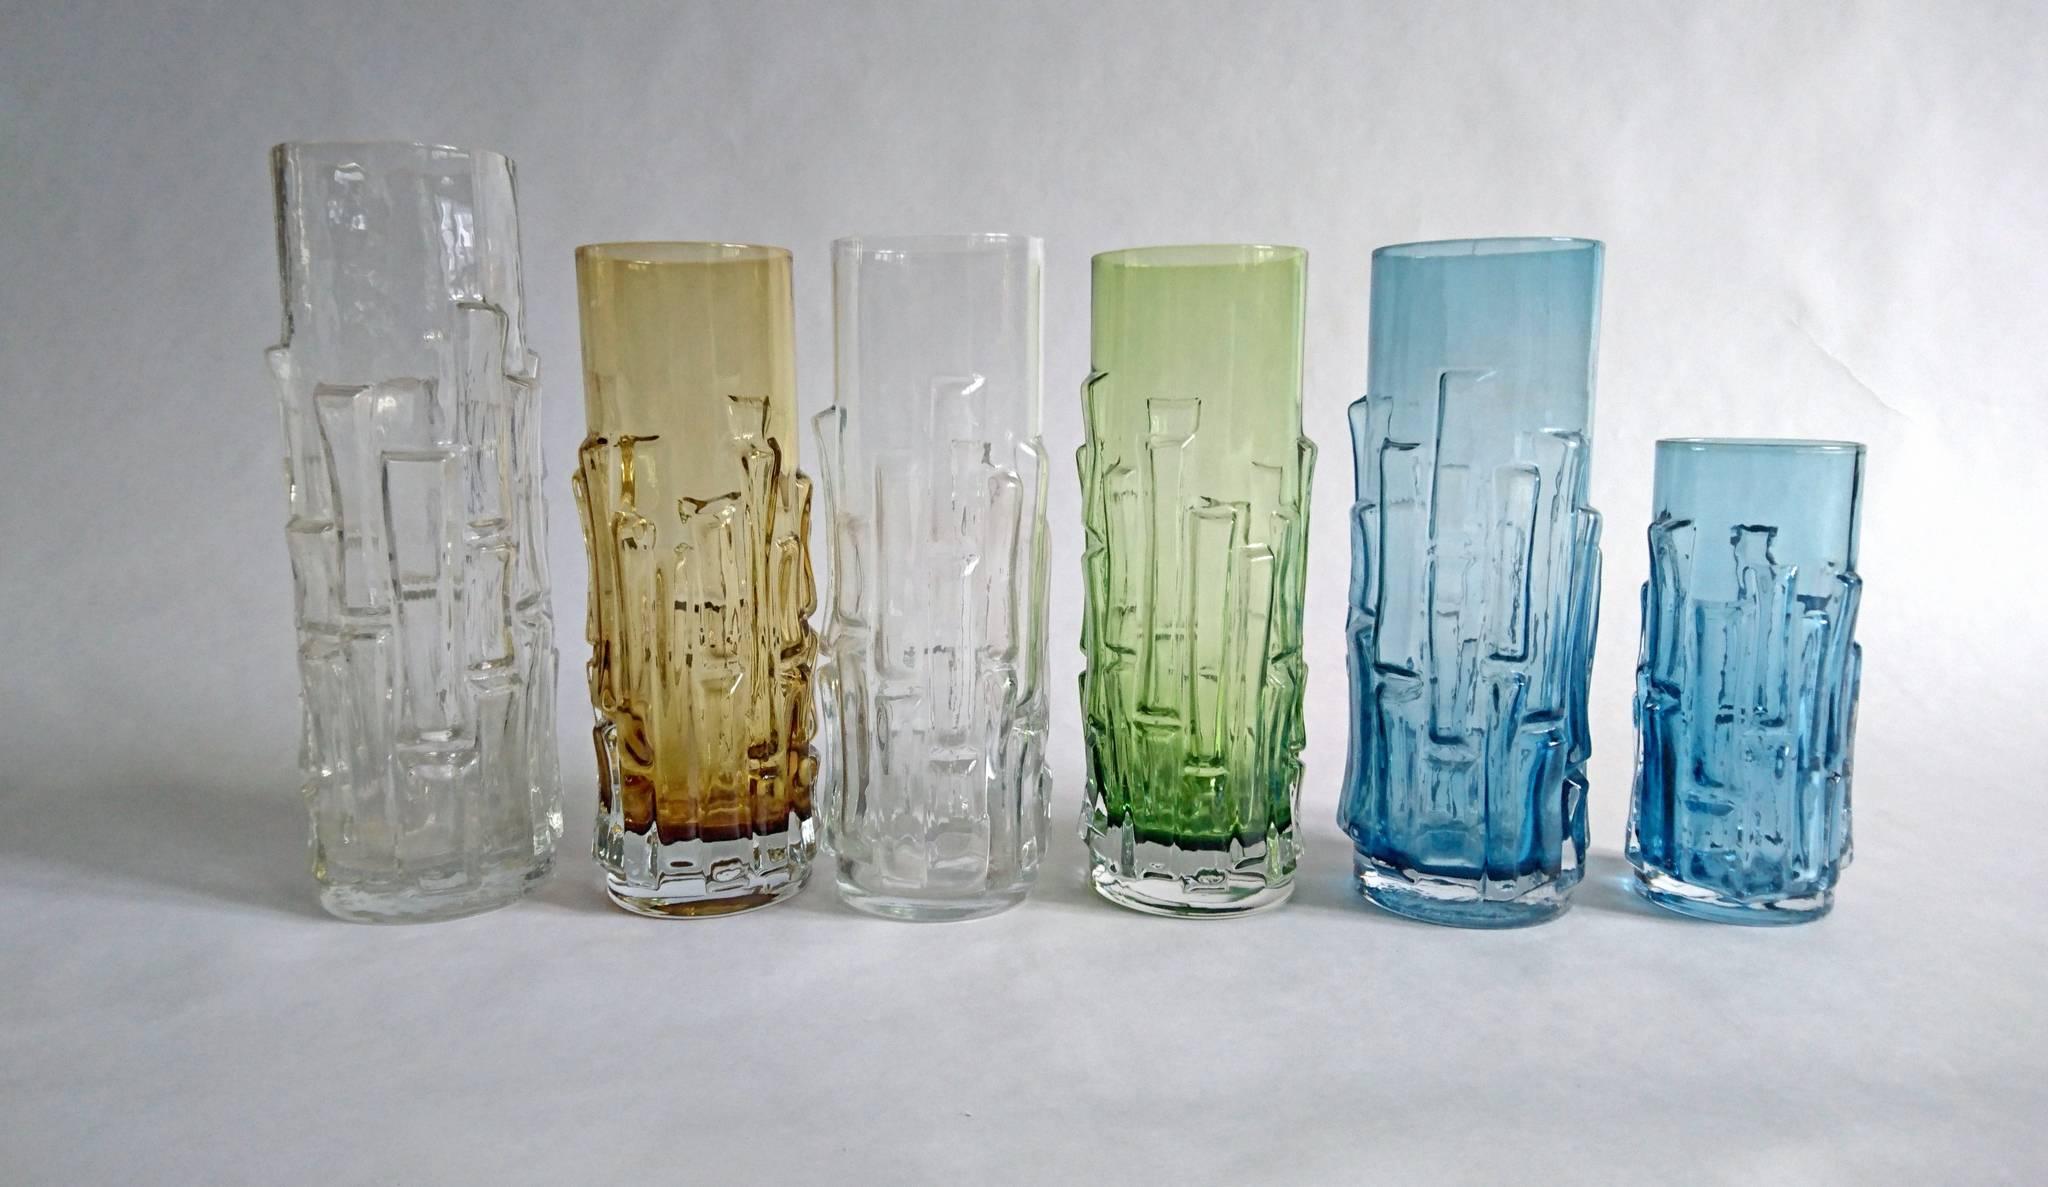 Six midcentury vases of different sizes by Aseda Glasbruk (glass makers) Sweden. In blue, green, amber and clear cased glass bamboo style. The name of the design is 'Bark' vase, designed by Bo Borgstrom.
The tallest clear vase is 24 cm tall,